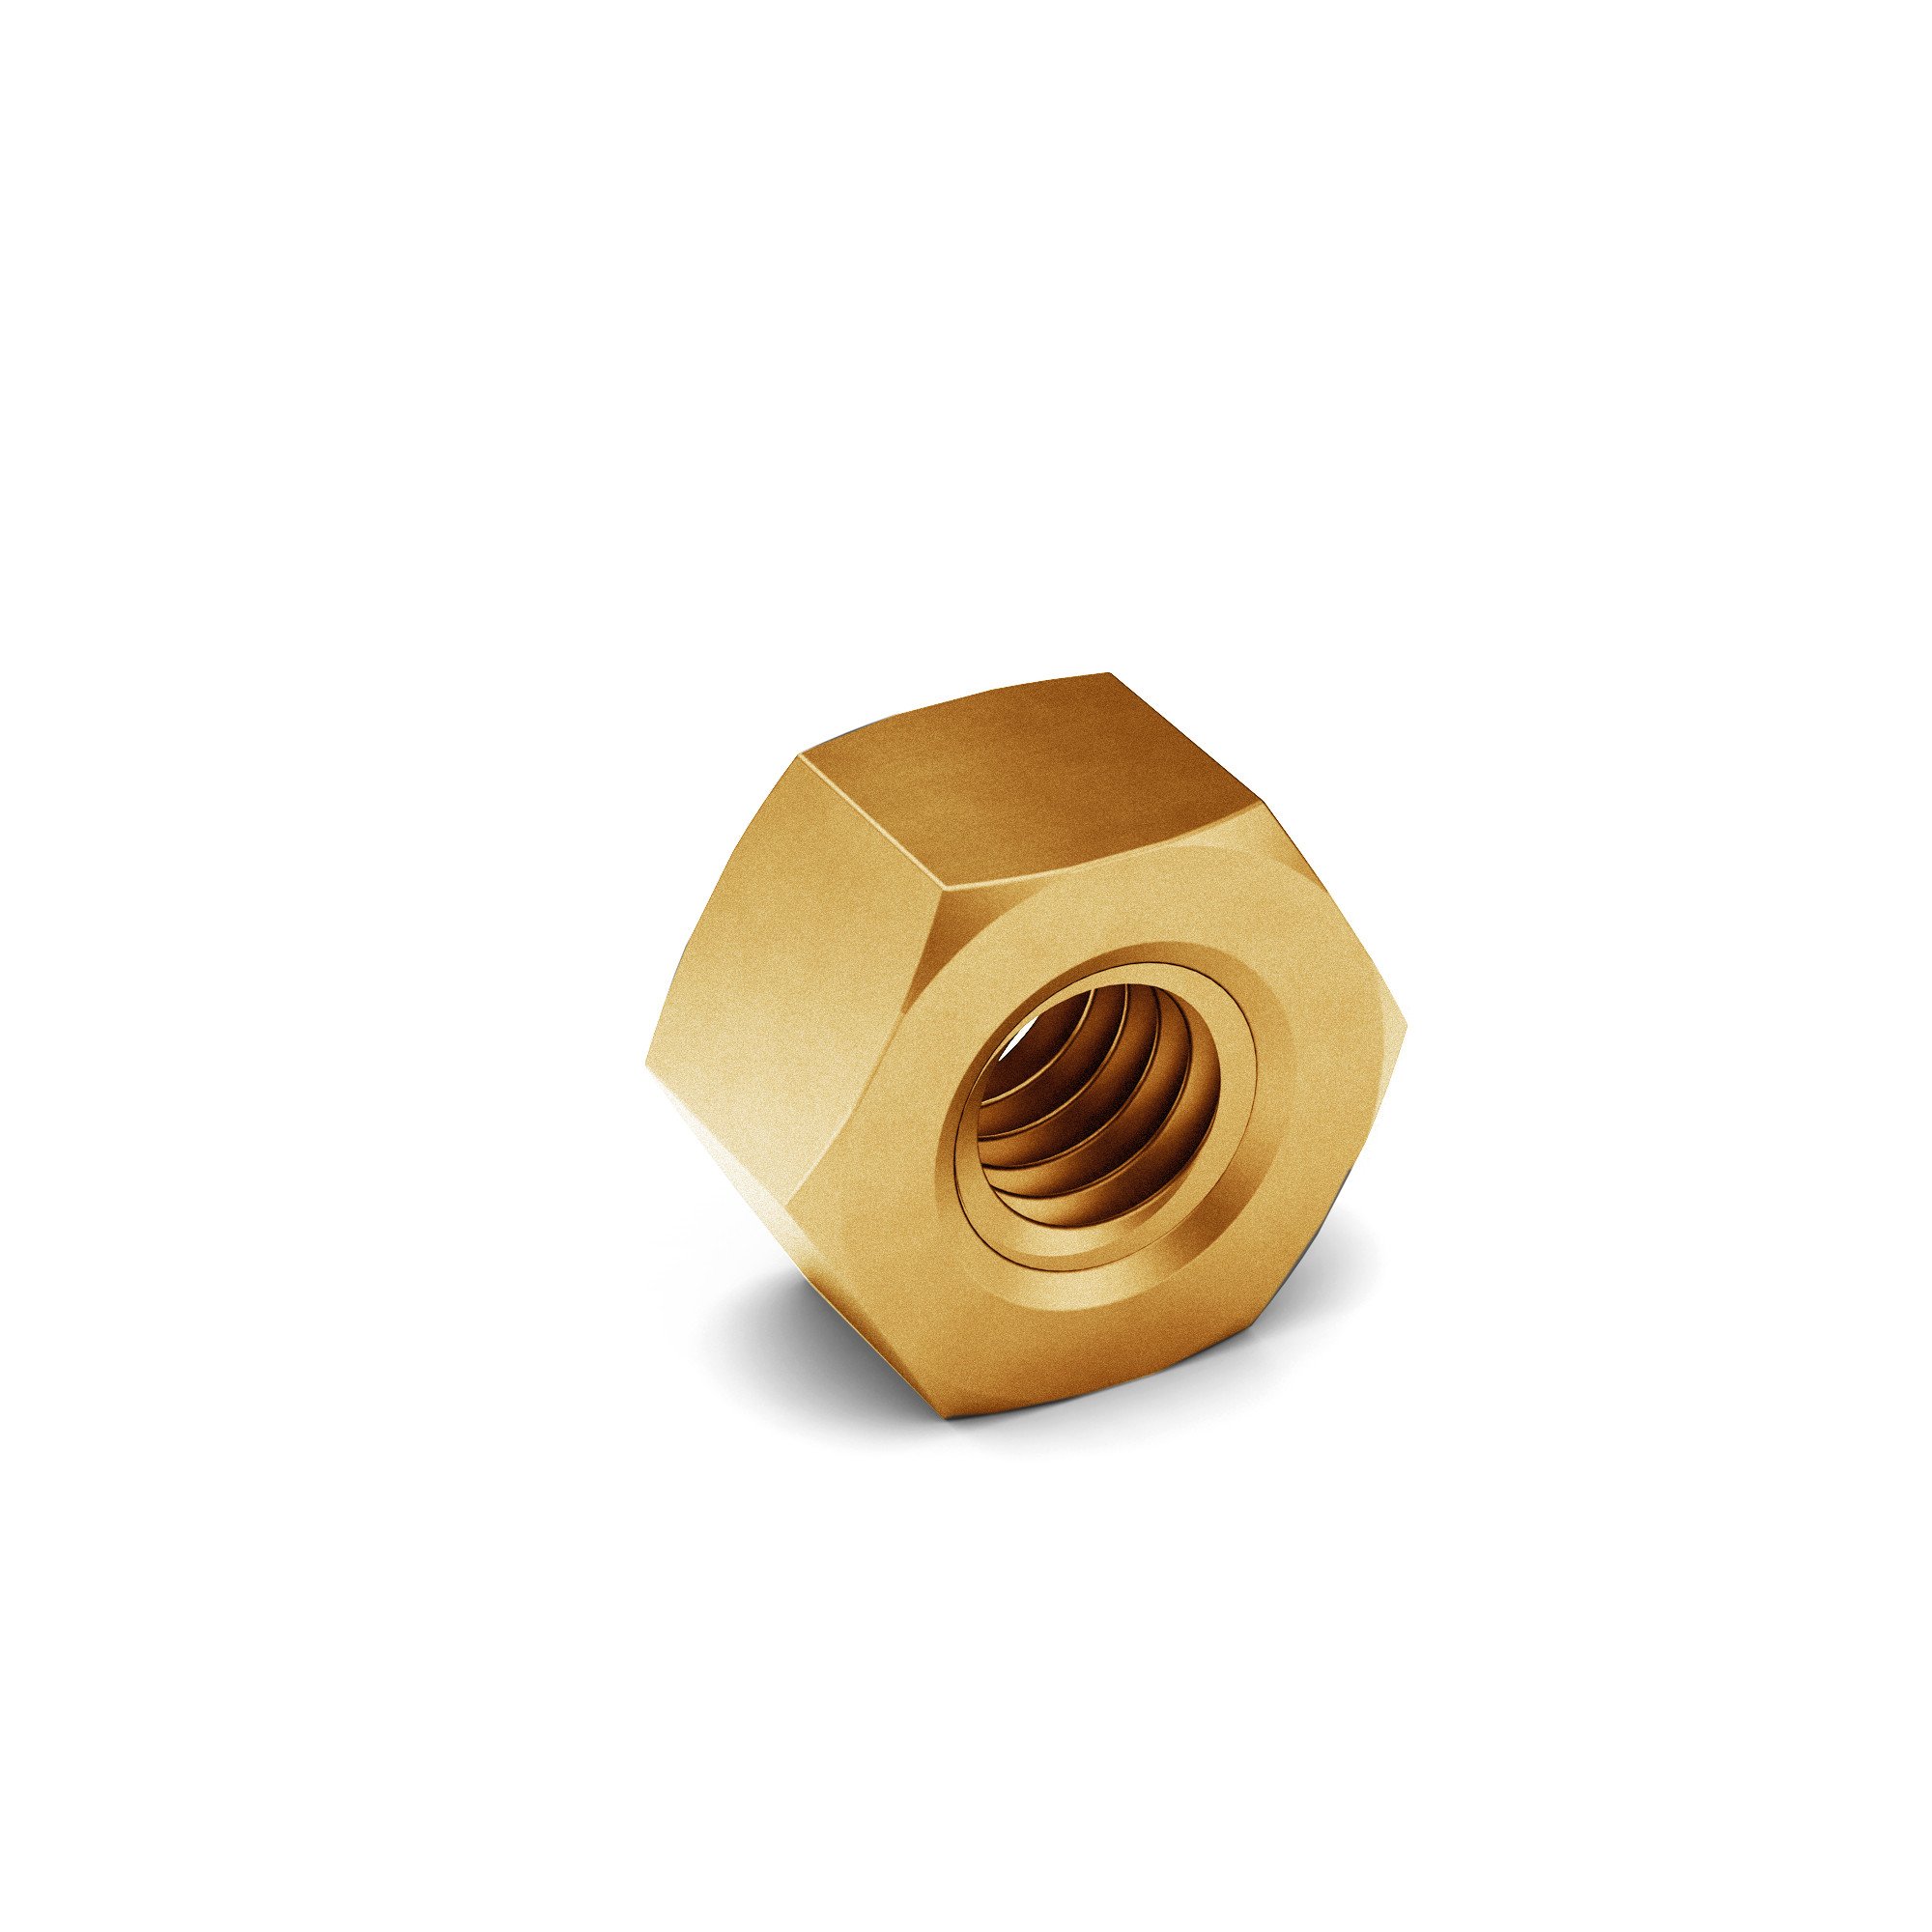 9/16-18 J995 GR 8 Hex Nut Zinc Yellow Made in USA